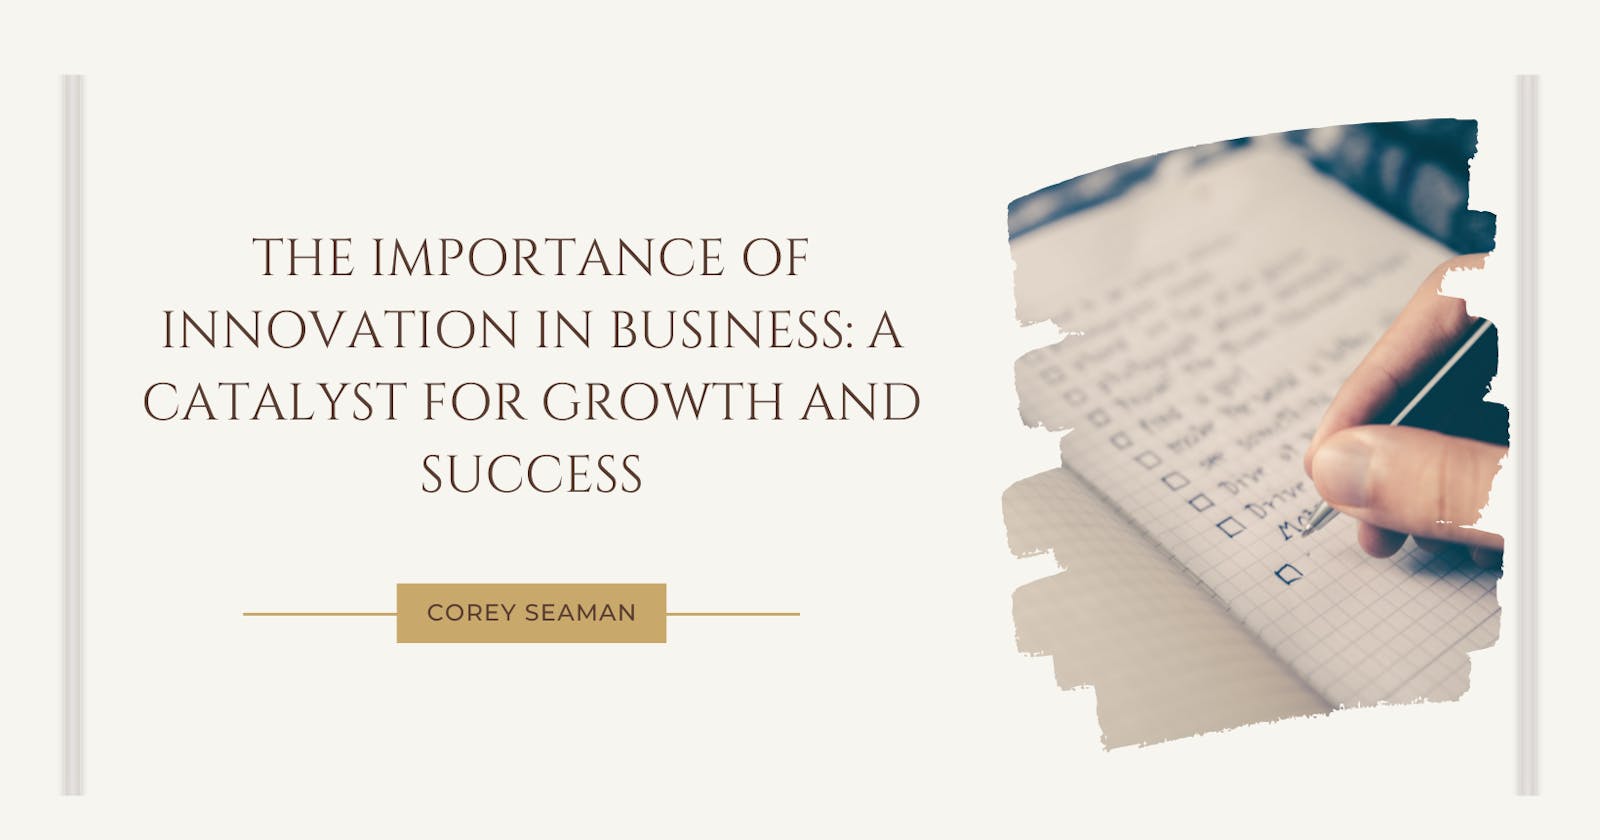 Corey Seaman | The Importance of Innovation in Business: A Catalyst for Growth and Success